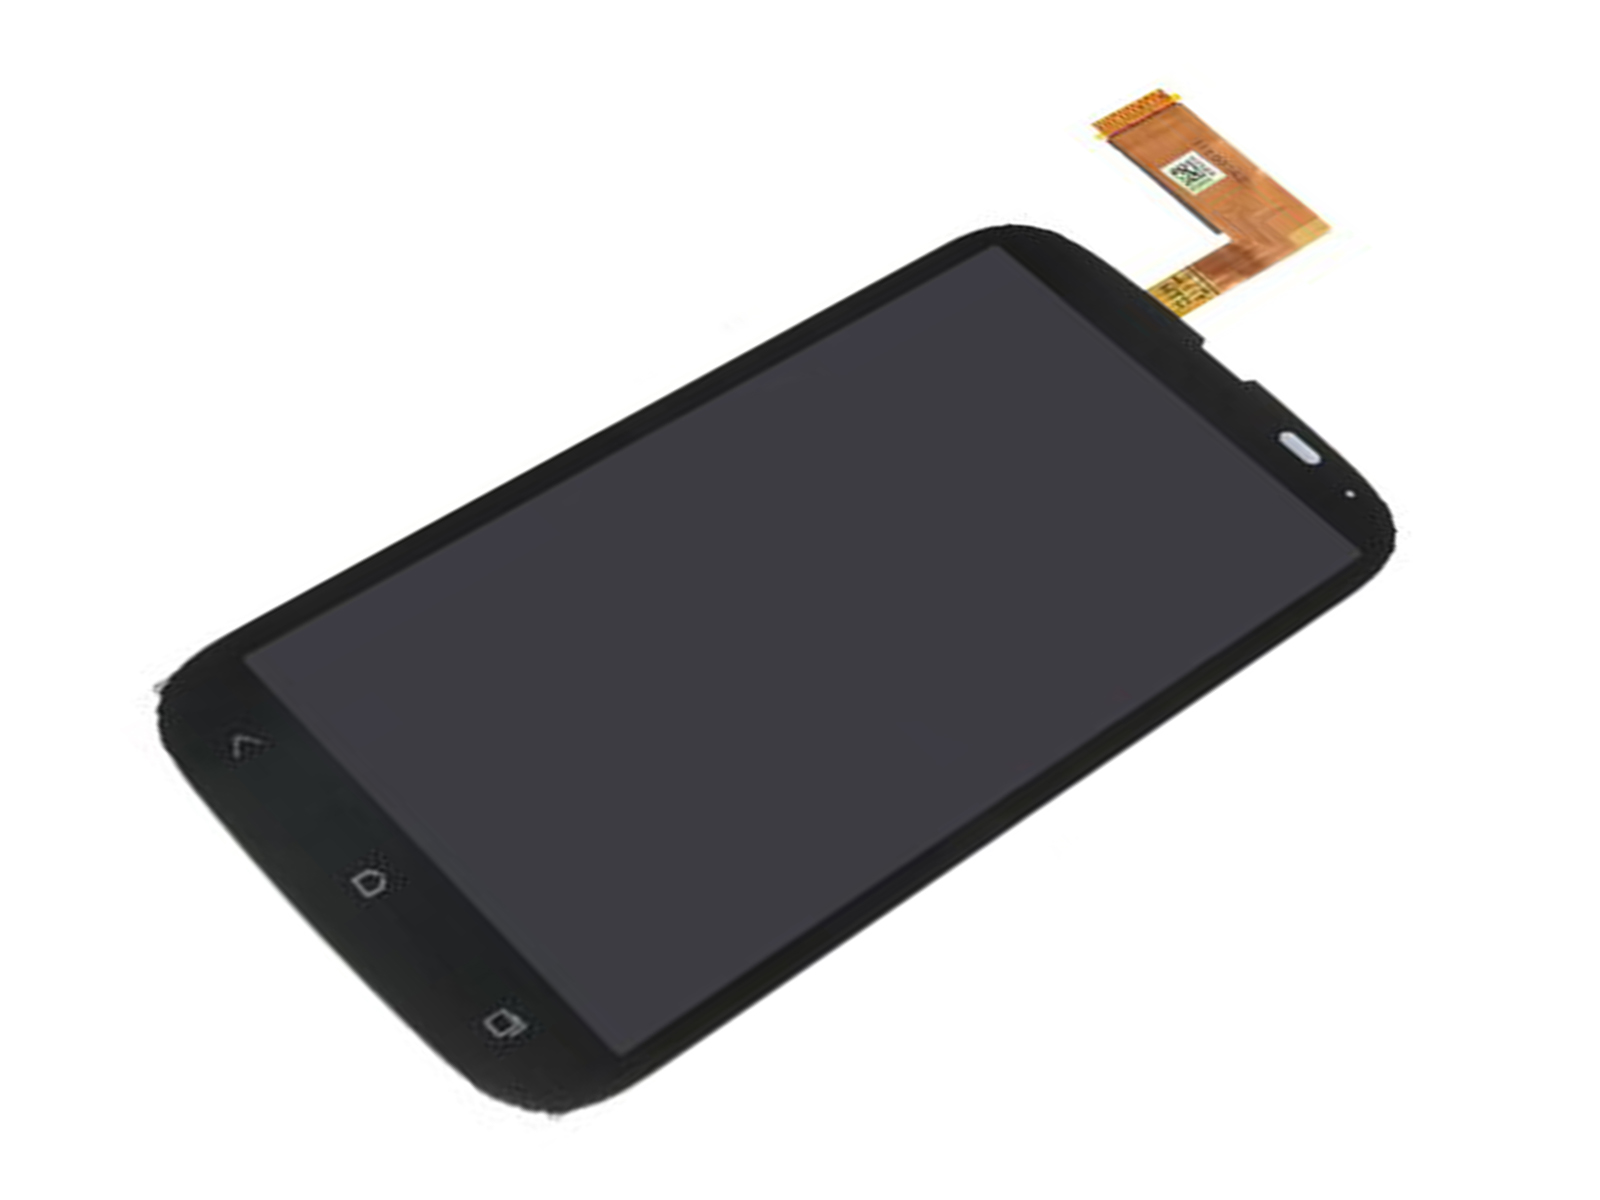 HTC T328e LCD Assembly